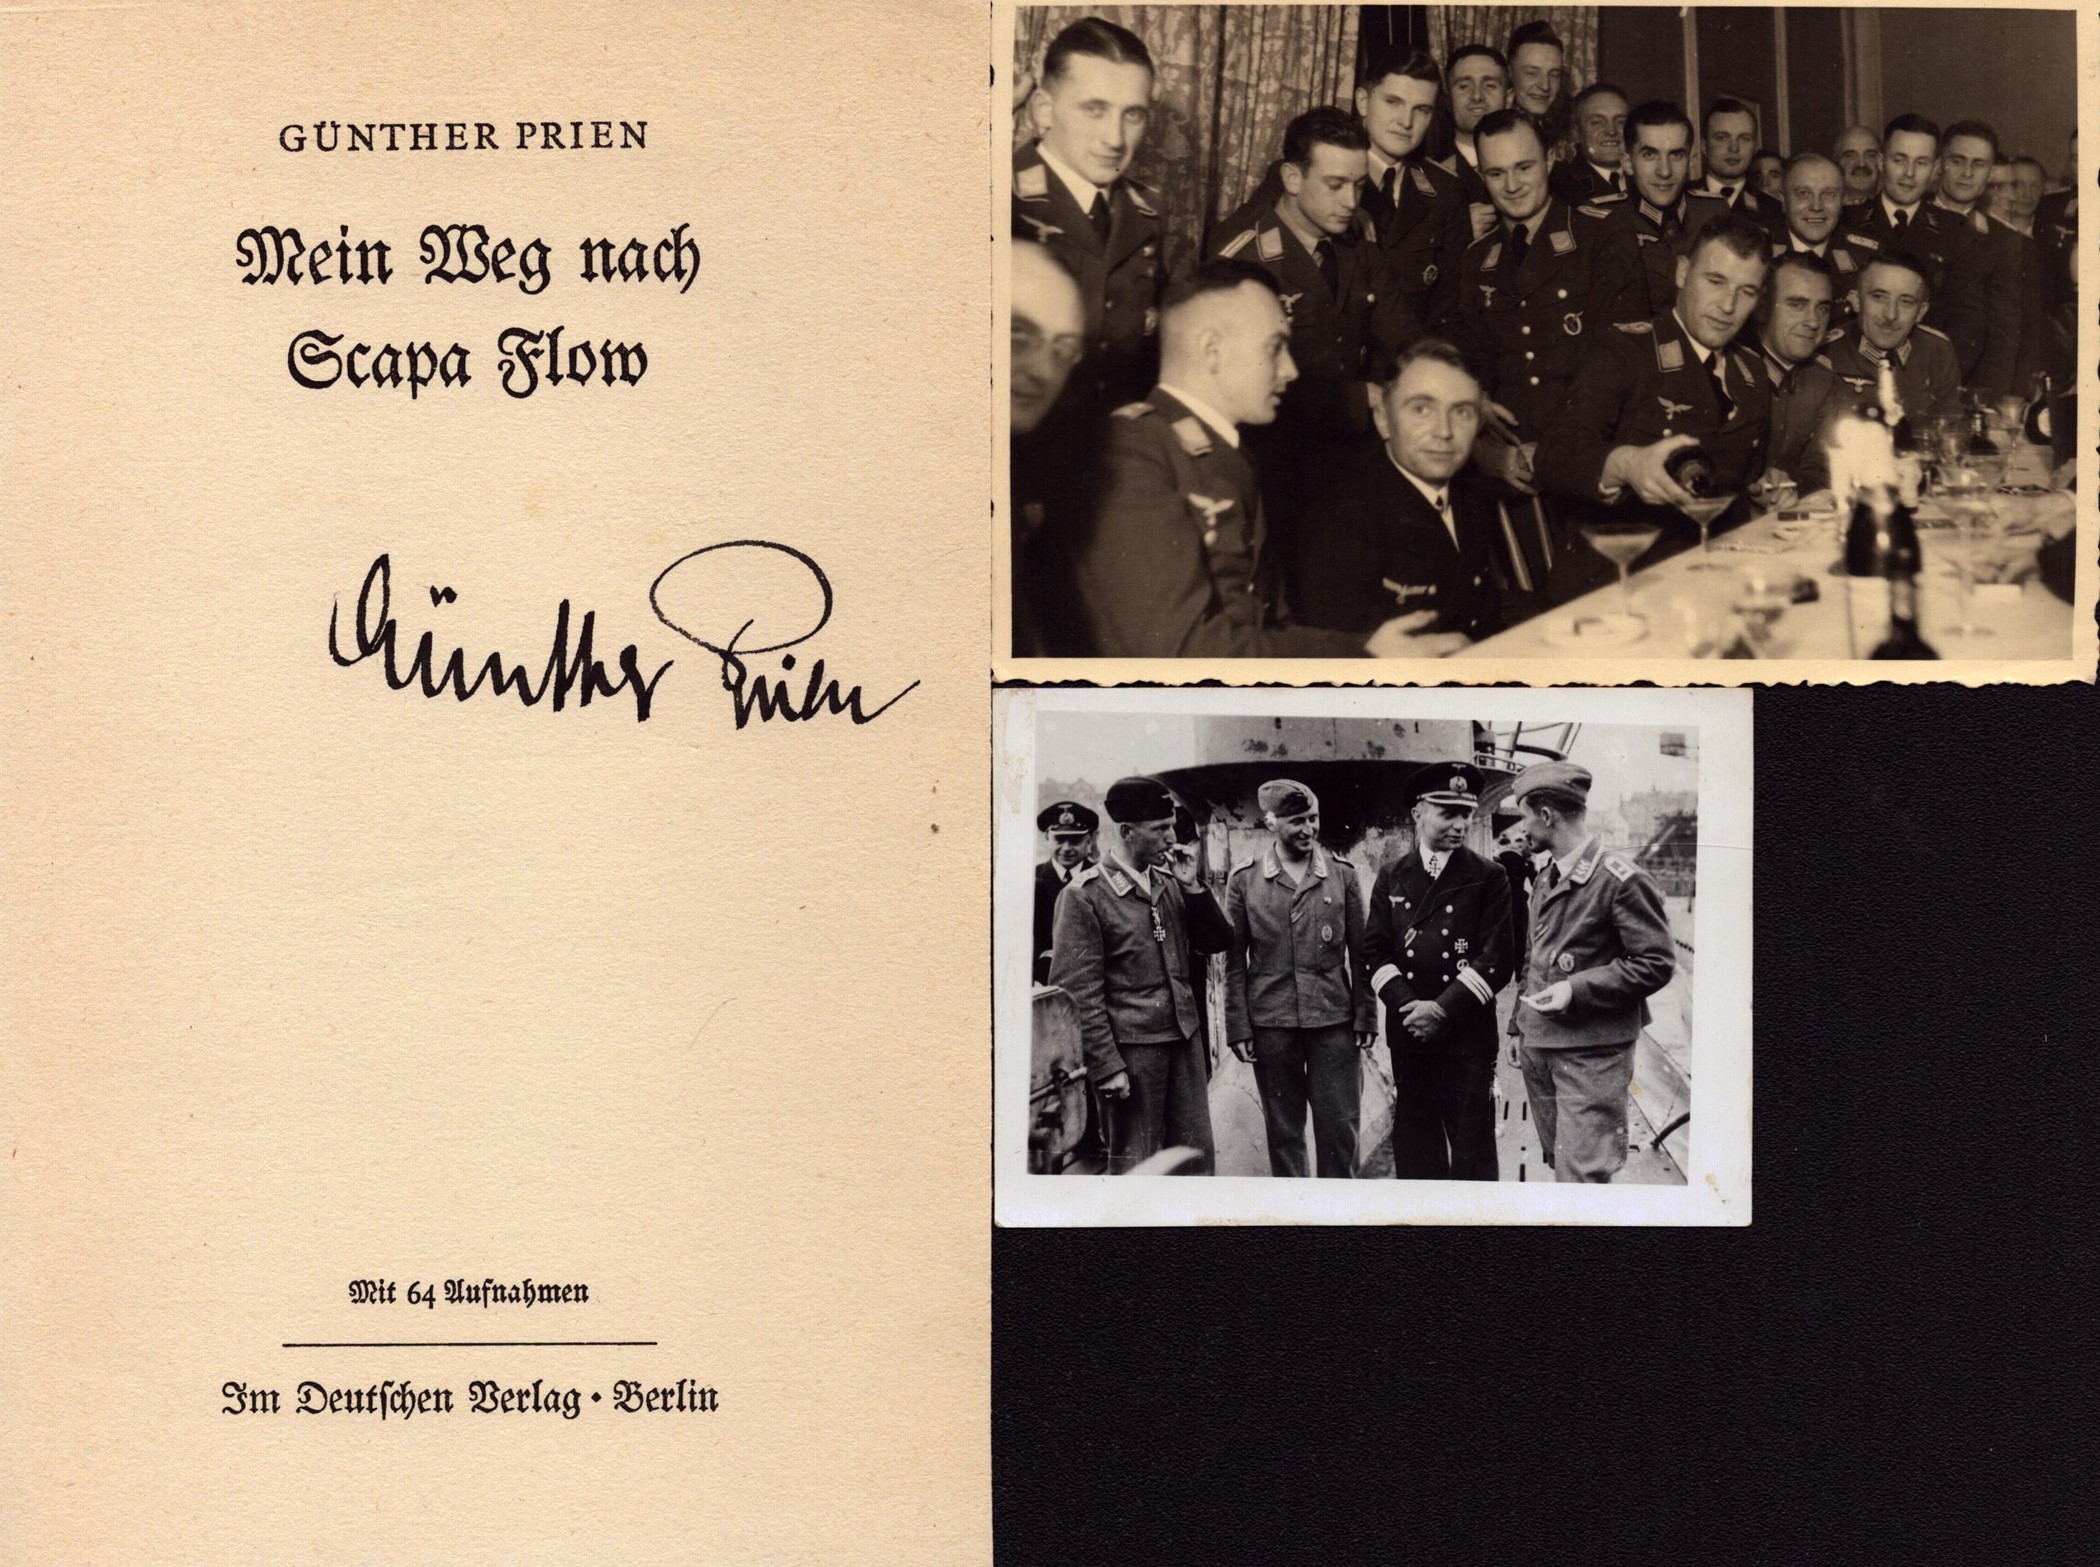 U-Boat Ace Günther Prien signed original compliments slip accompanied with unsigned black and